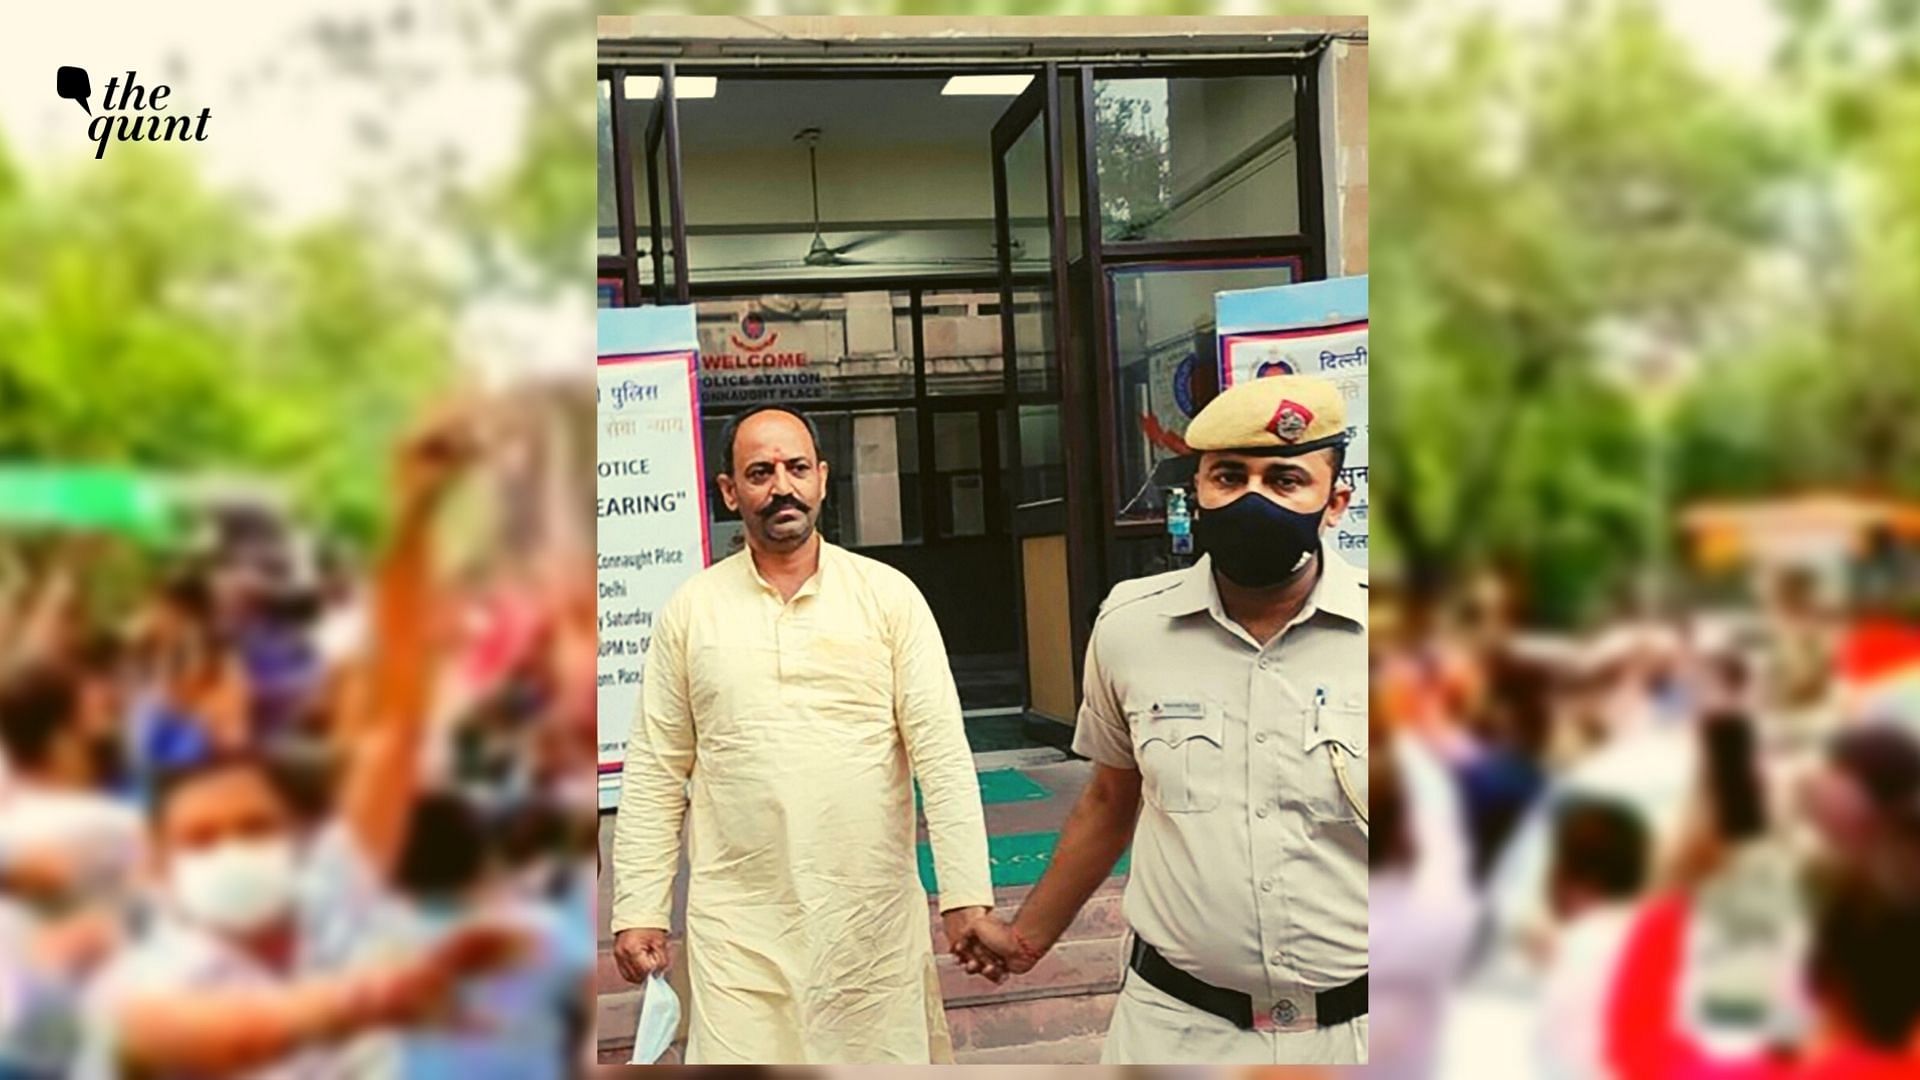 <div class="paragraphs"><p>Hindu Raksha Dal chief Bhupinder Tomar alias Pinki Chaudhary, one of the prime accused in the case of raising communal slogans at Delhi's Jantar Mantar a few weeks ago, surrendered before the Delhi Police on Tuesday, 31 August.</p></div>